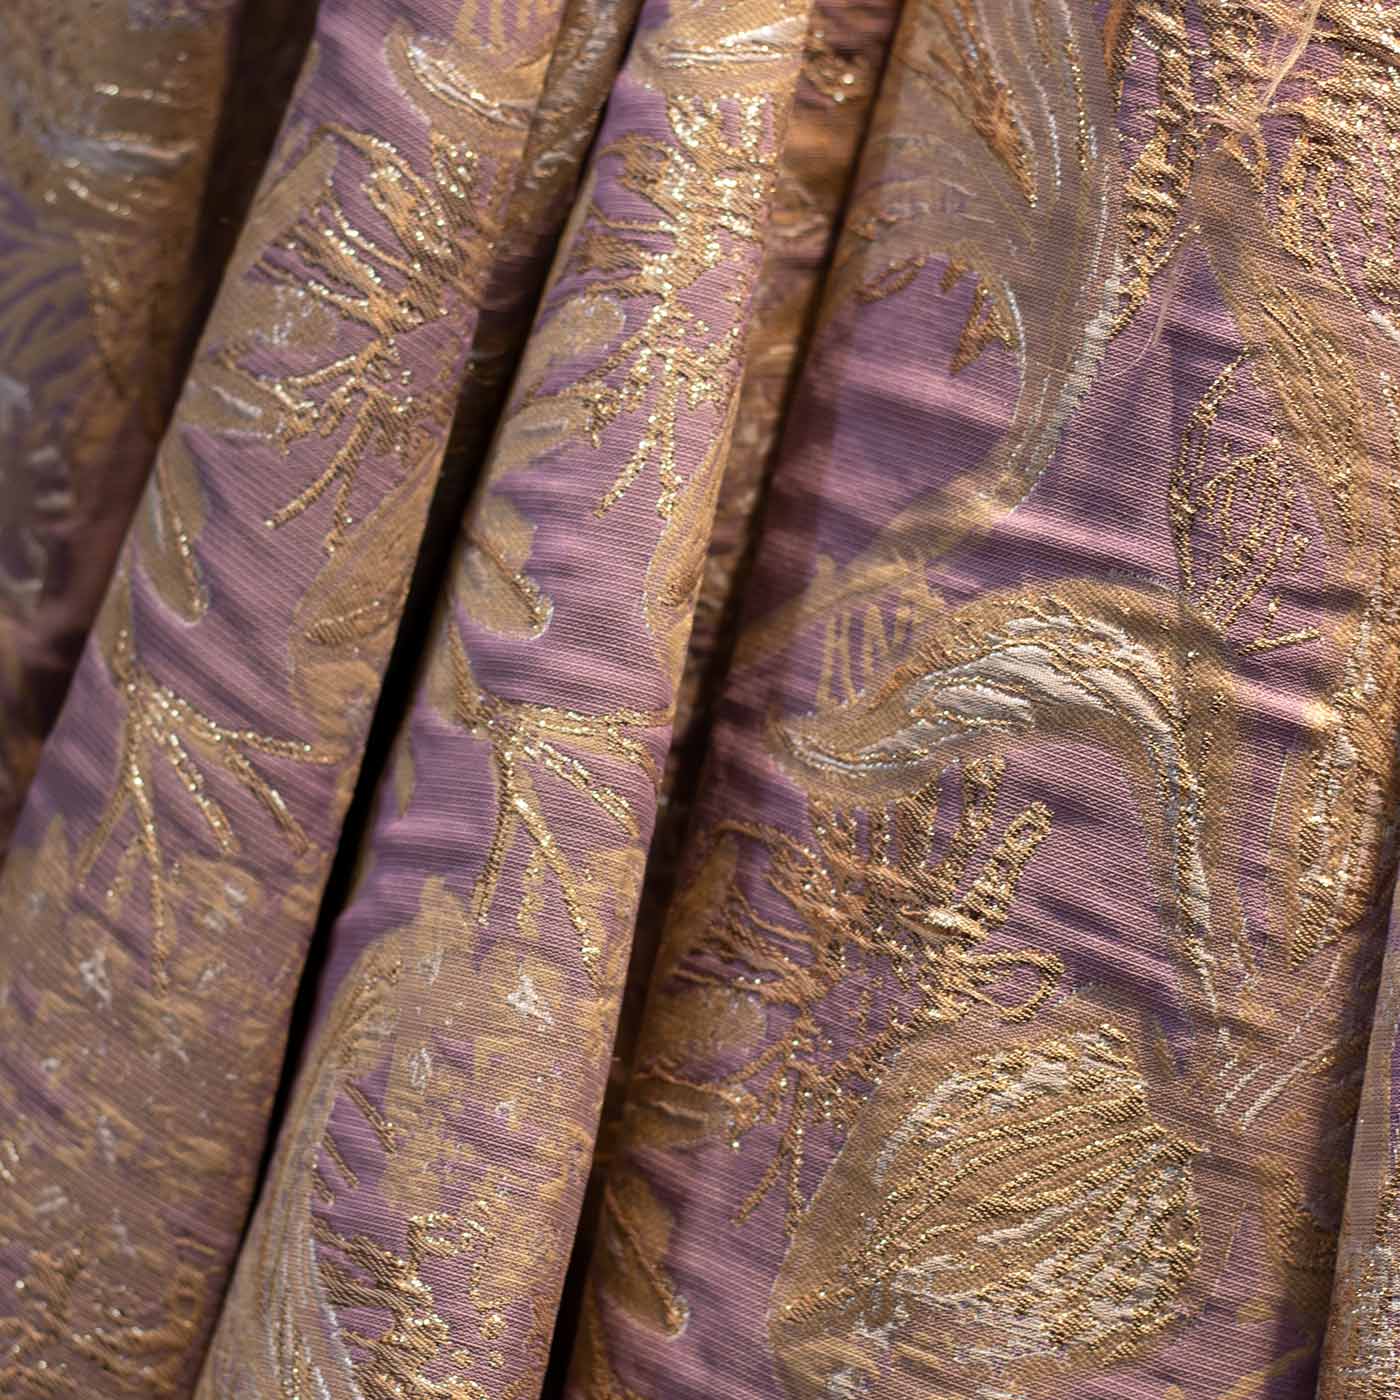 Gold and Silver on Lilac Floral Brocade Fabric